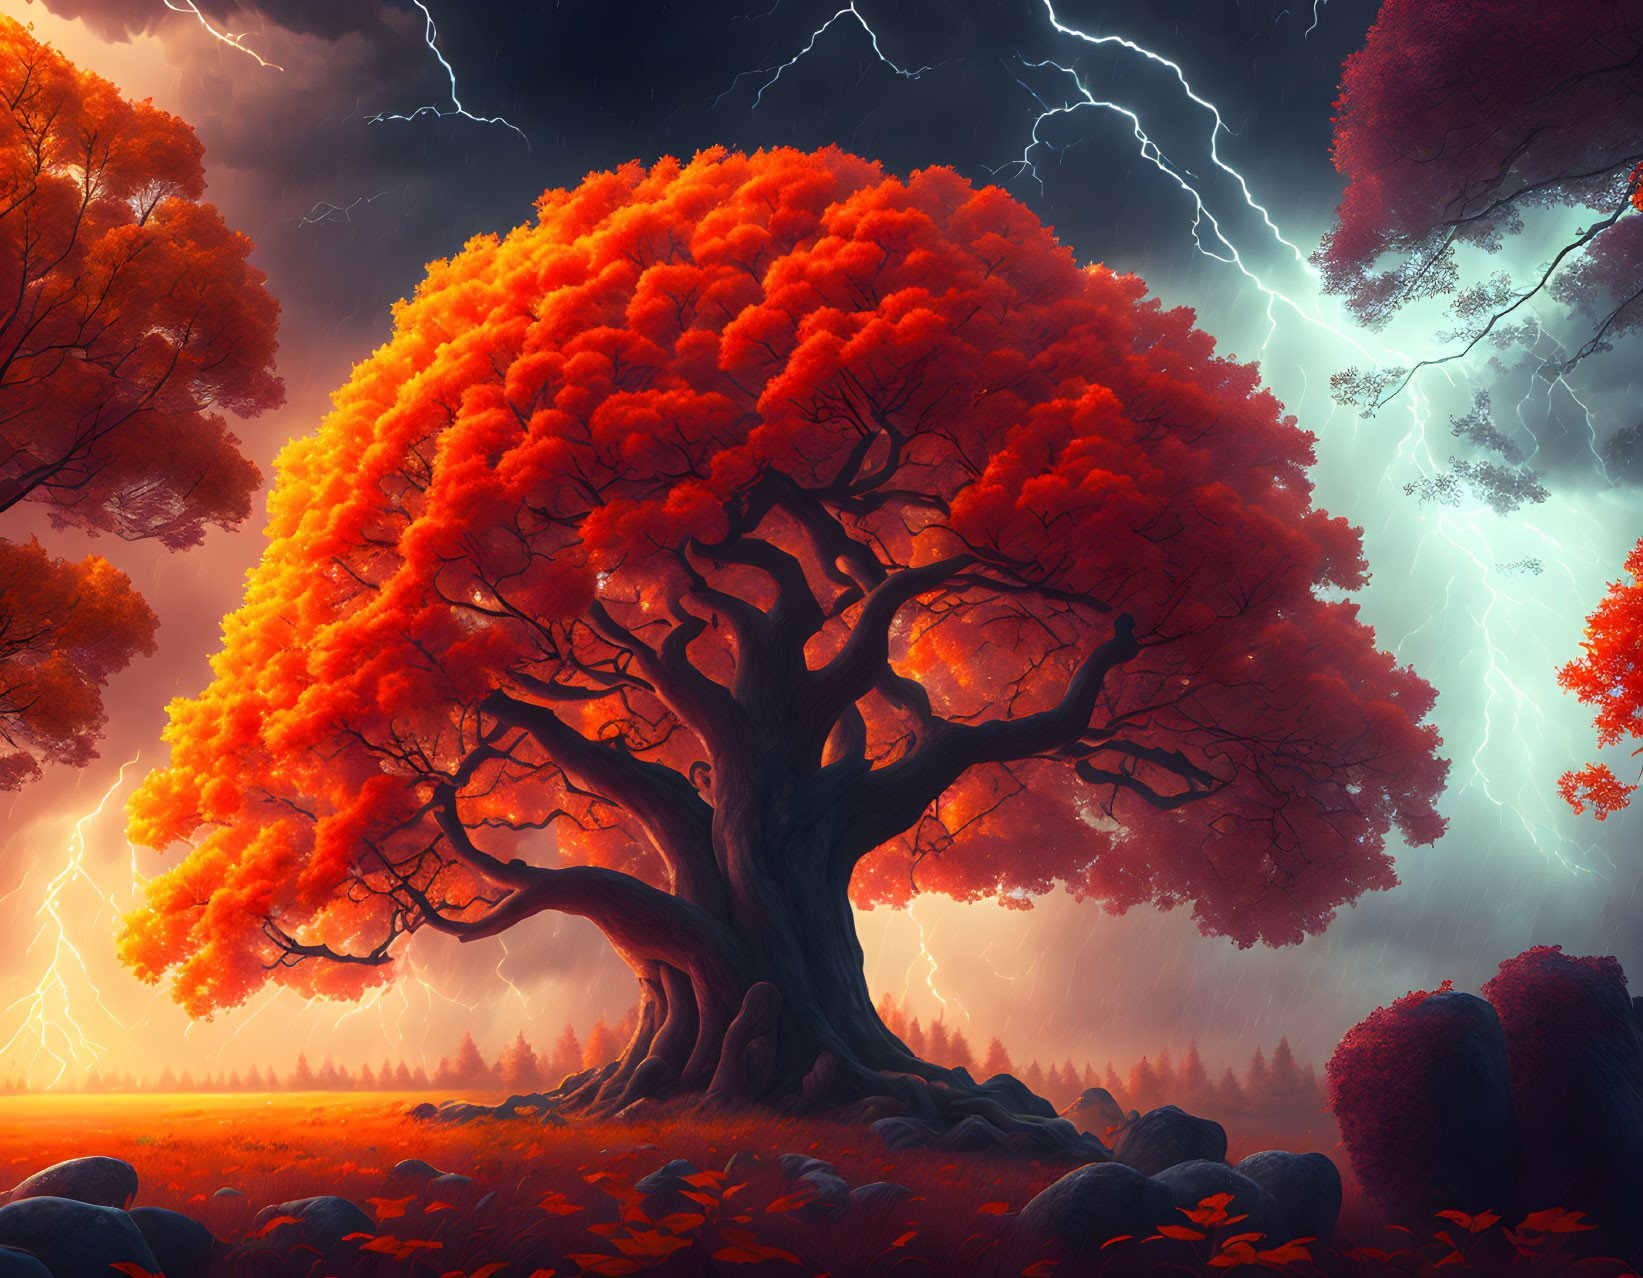 Orange Tree with Thick Trunk in Stormy Sky with Lightning